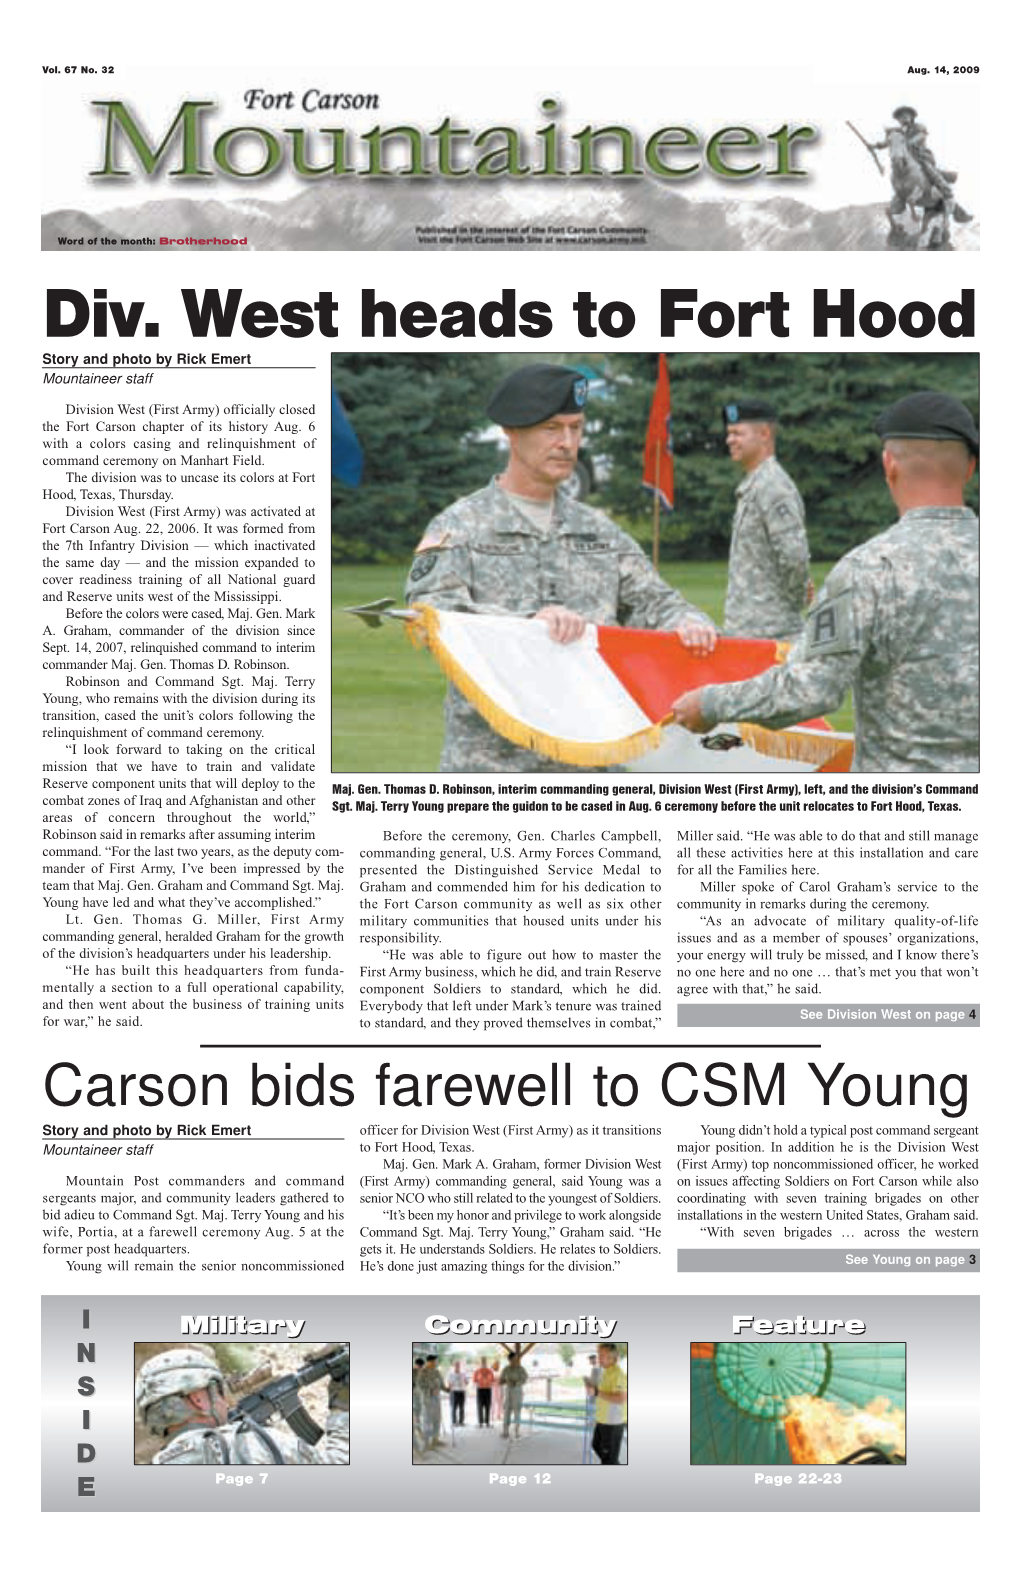 Div. West Heads to Fort Hood Story and Photo by Rick Emert Mountaineer Staff